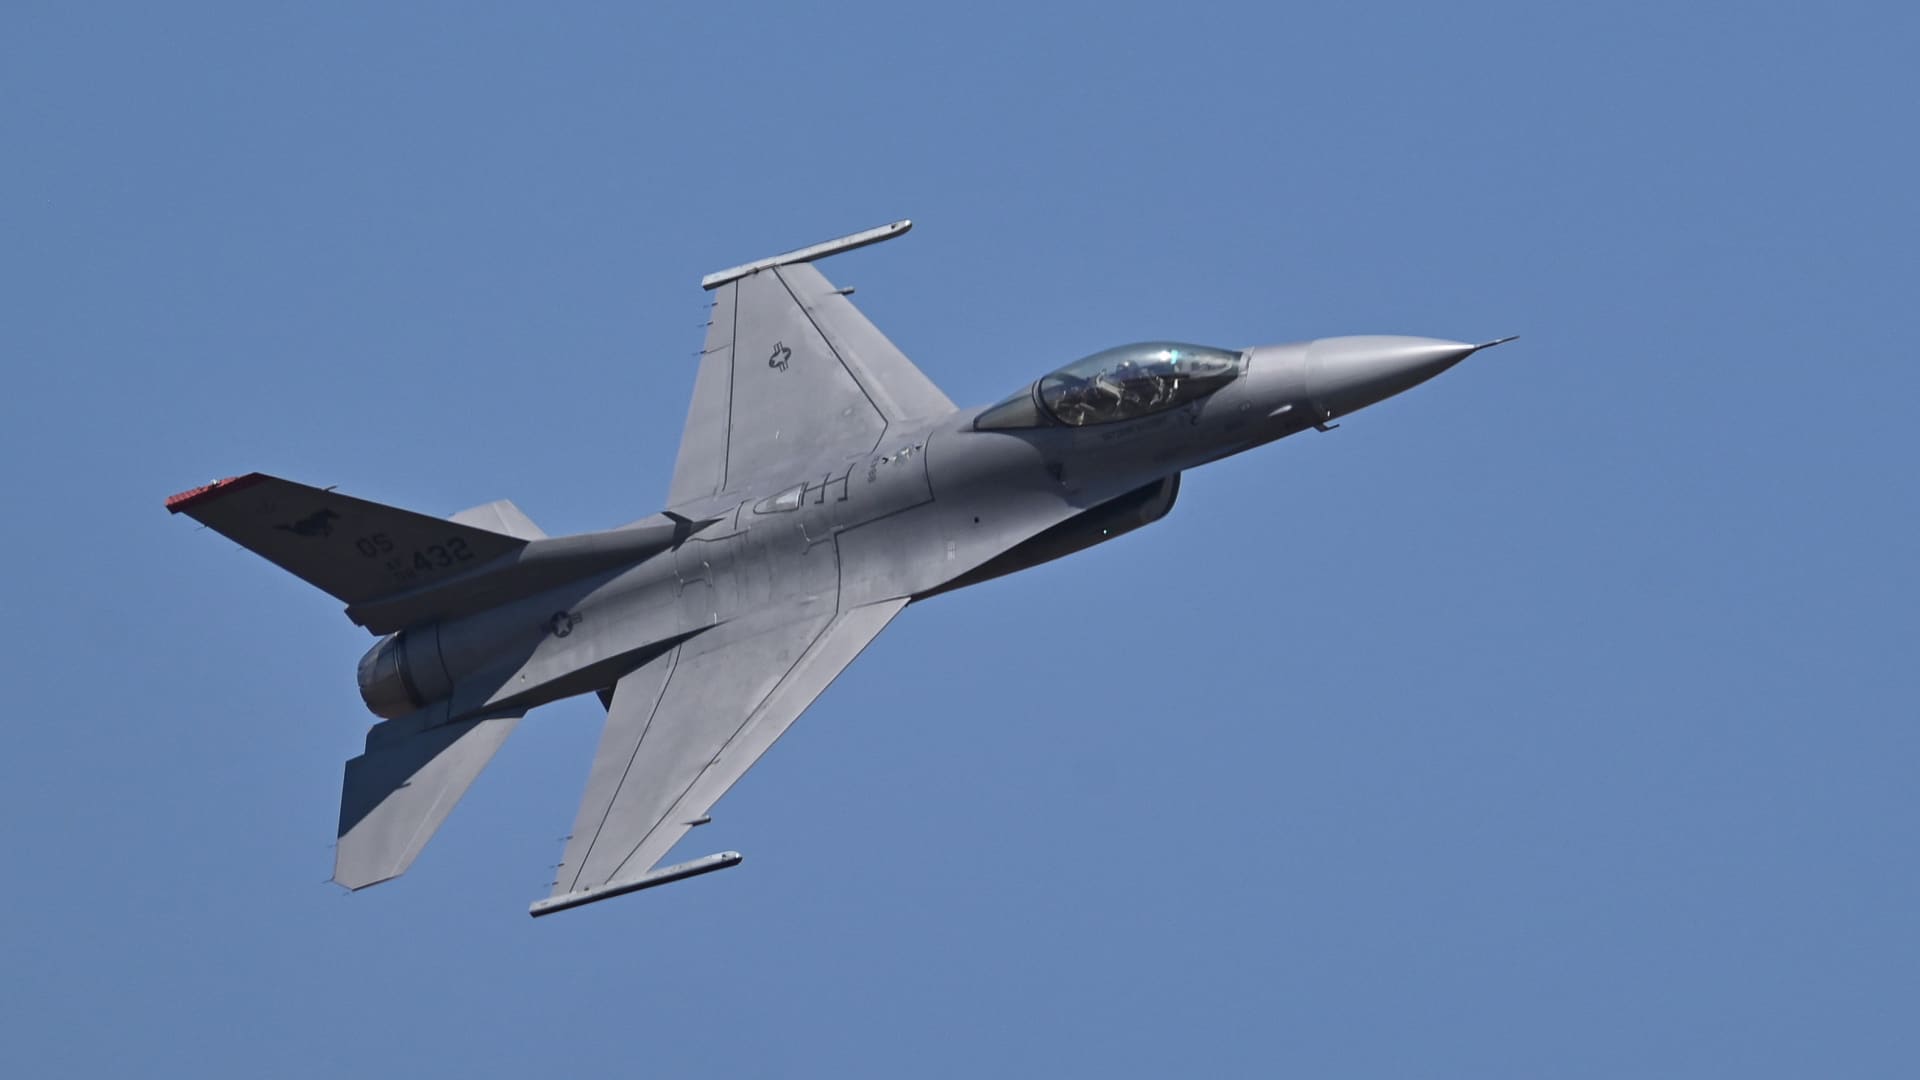 A U.S. Air Force F-16 Fighting Falcon fighter jet flies past during the second day of Aero India 2023 in Bengaluru on Feb. 14, 2023.